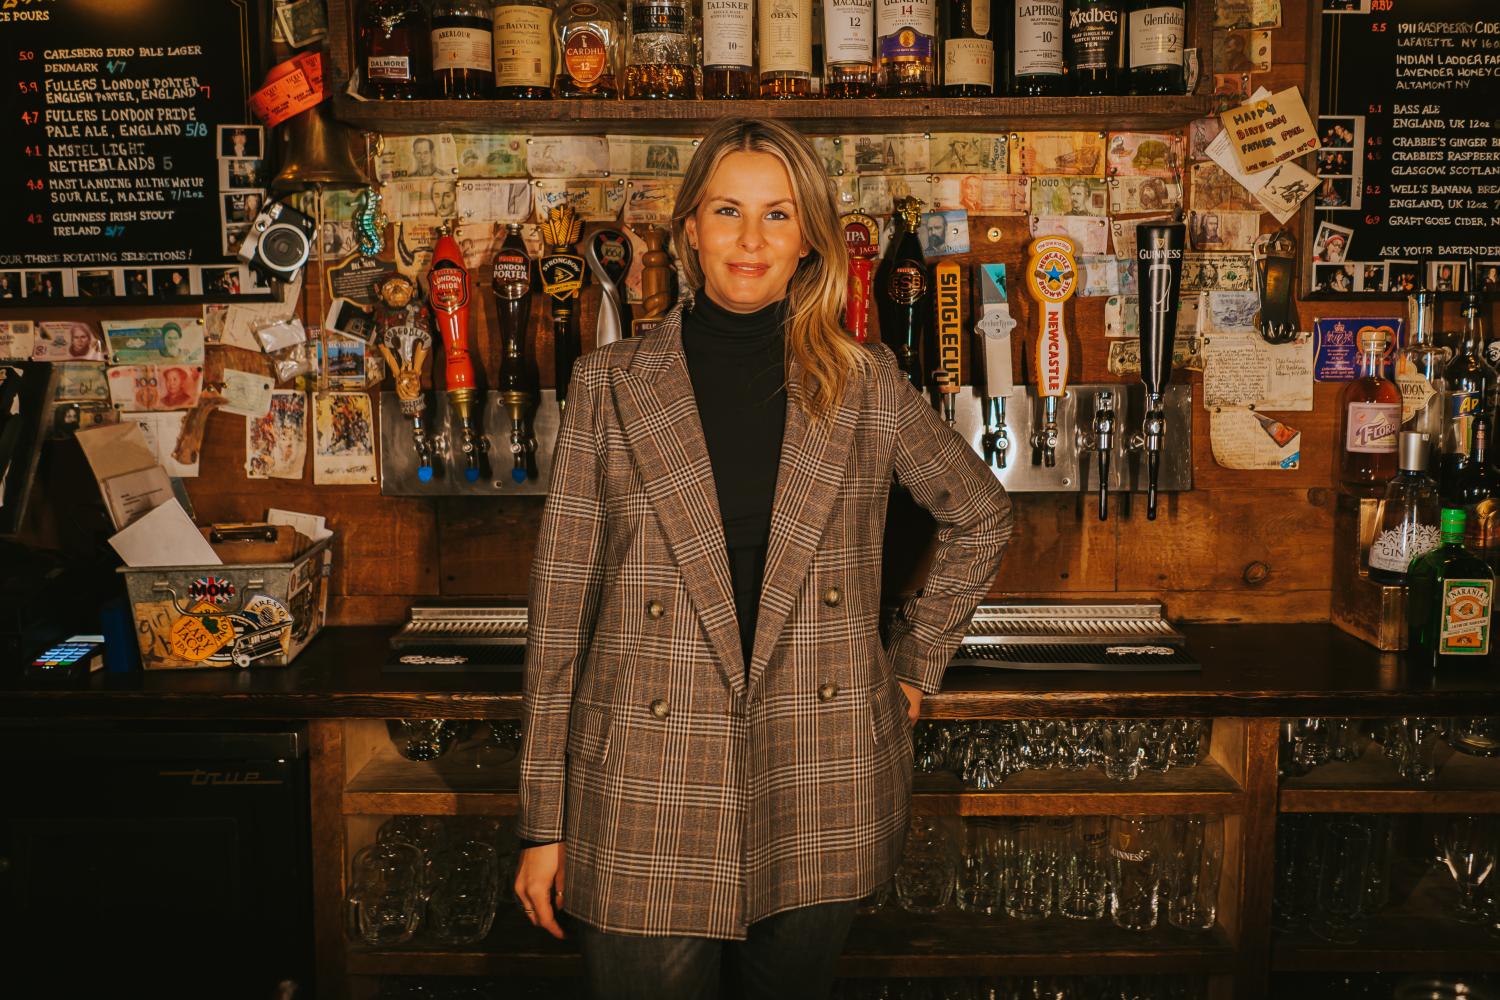 interior view of Olde English Pub with a woman in front of the beer selection